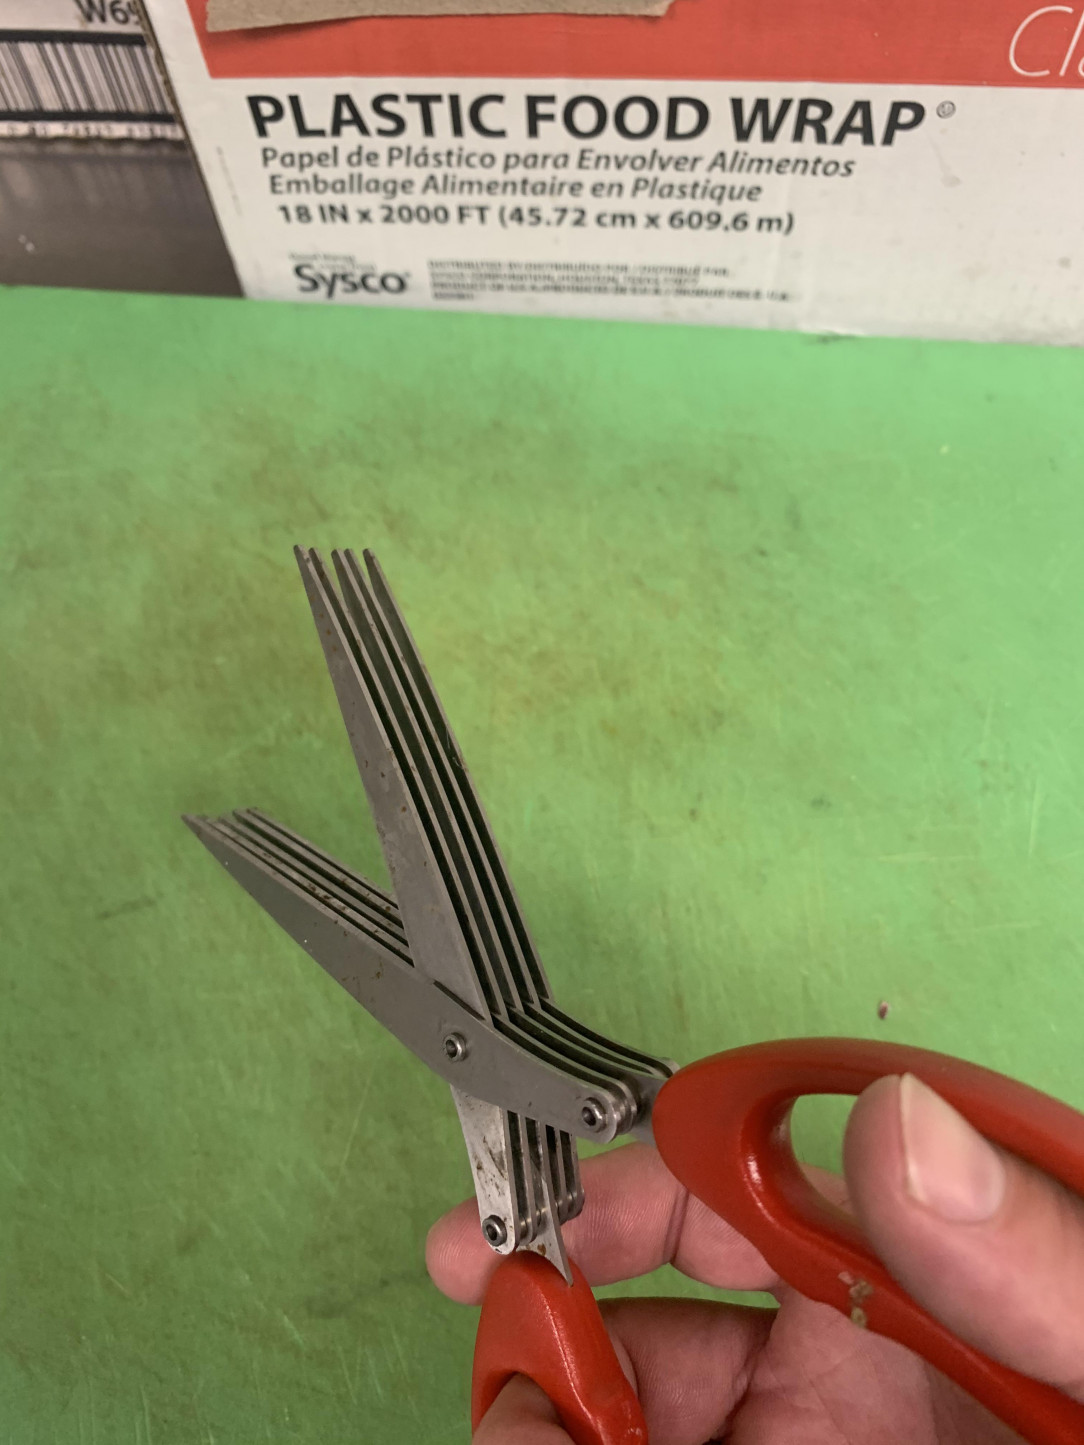 These ‘herb scissors’ are wild